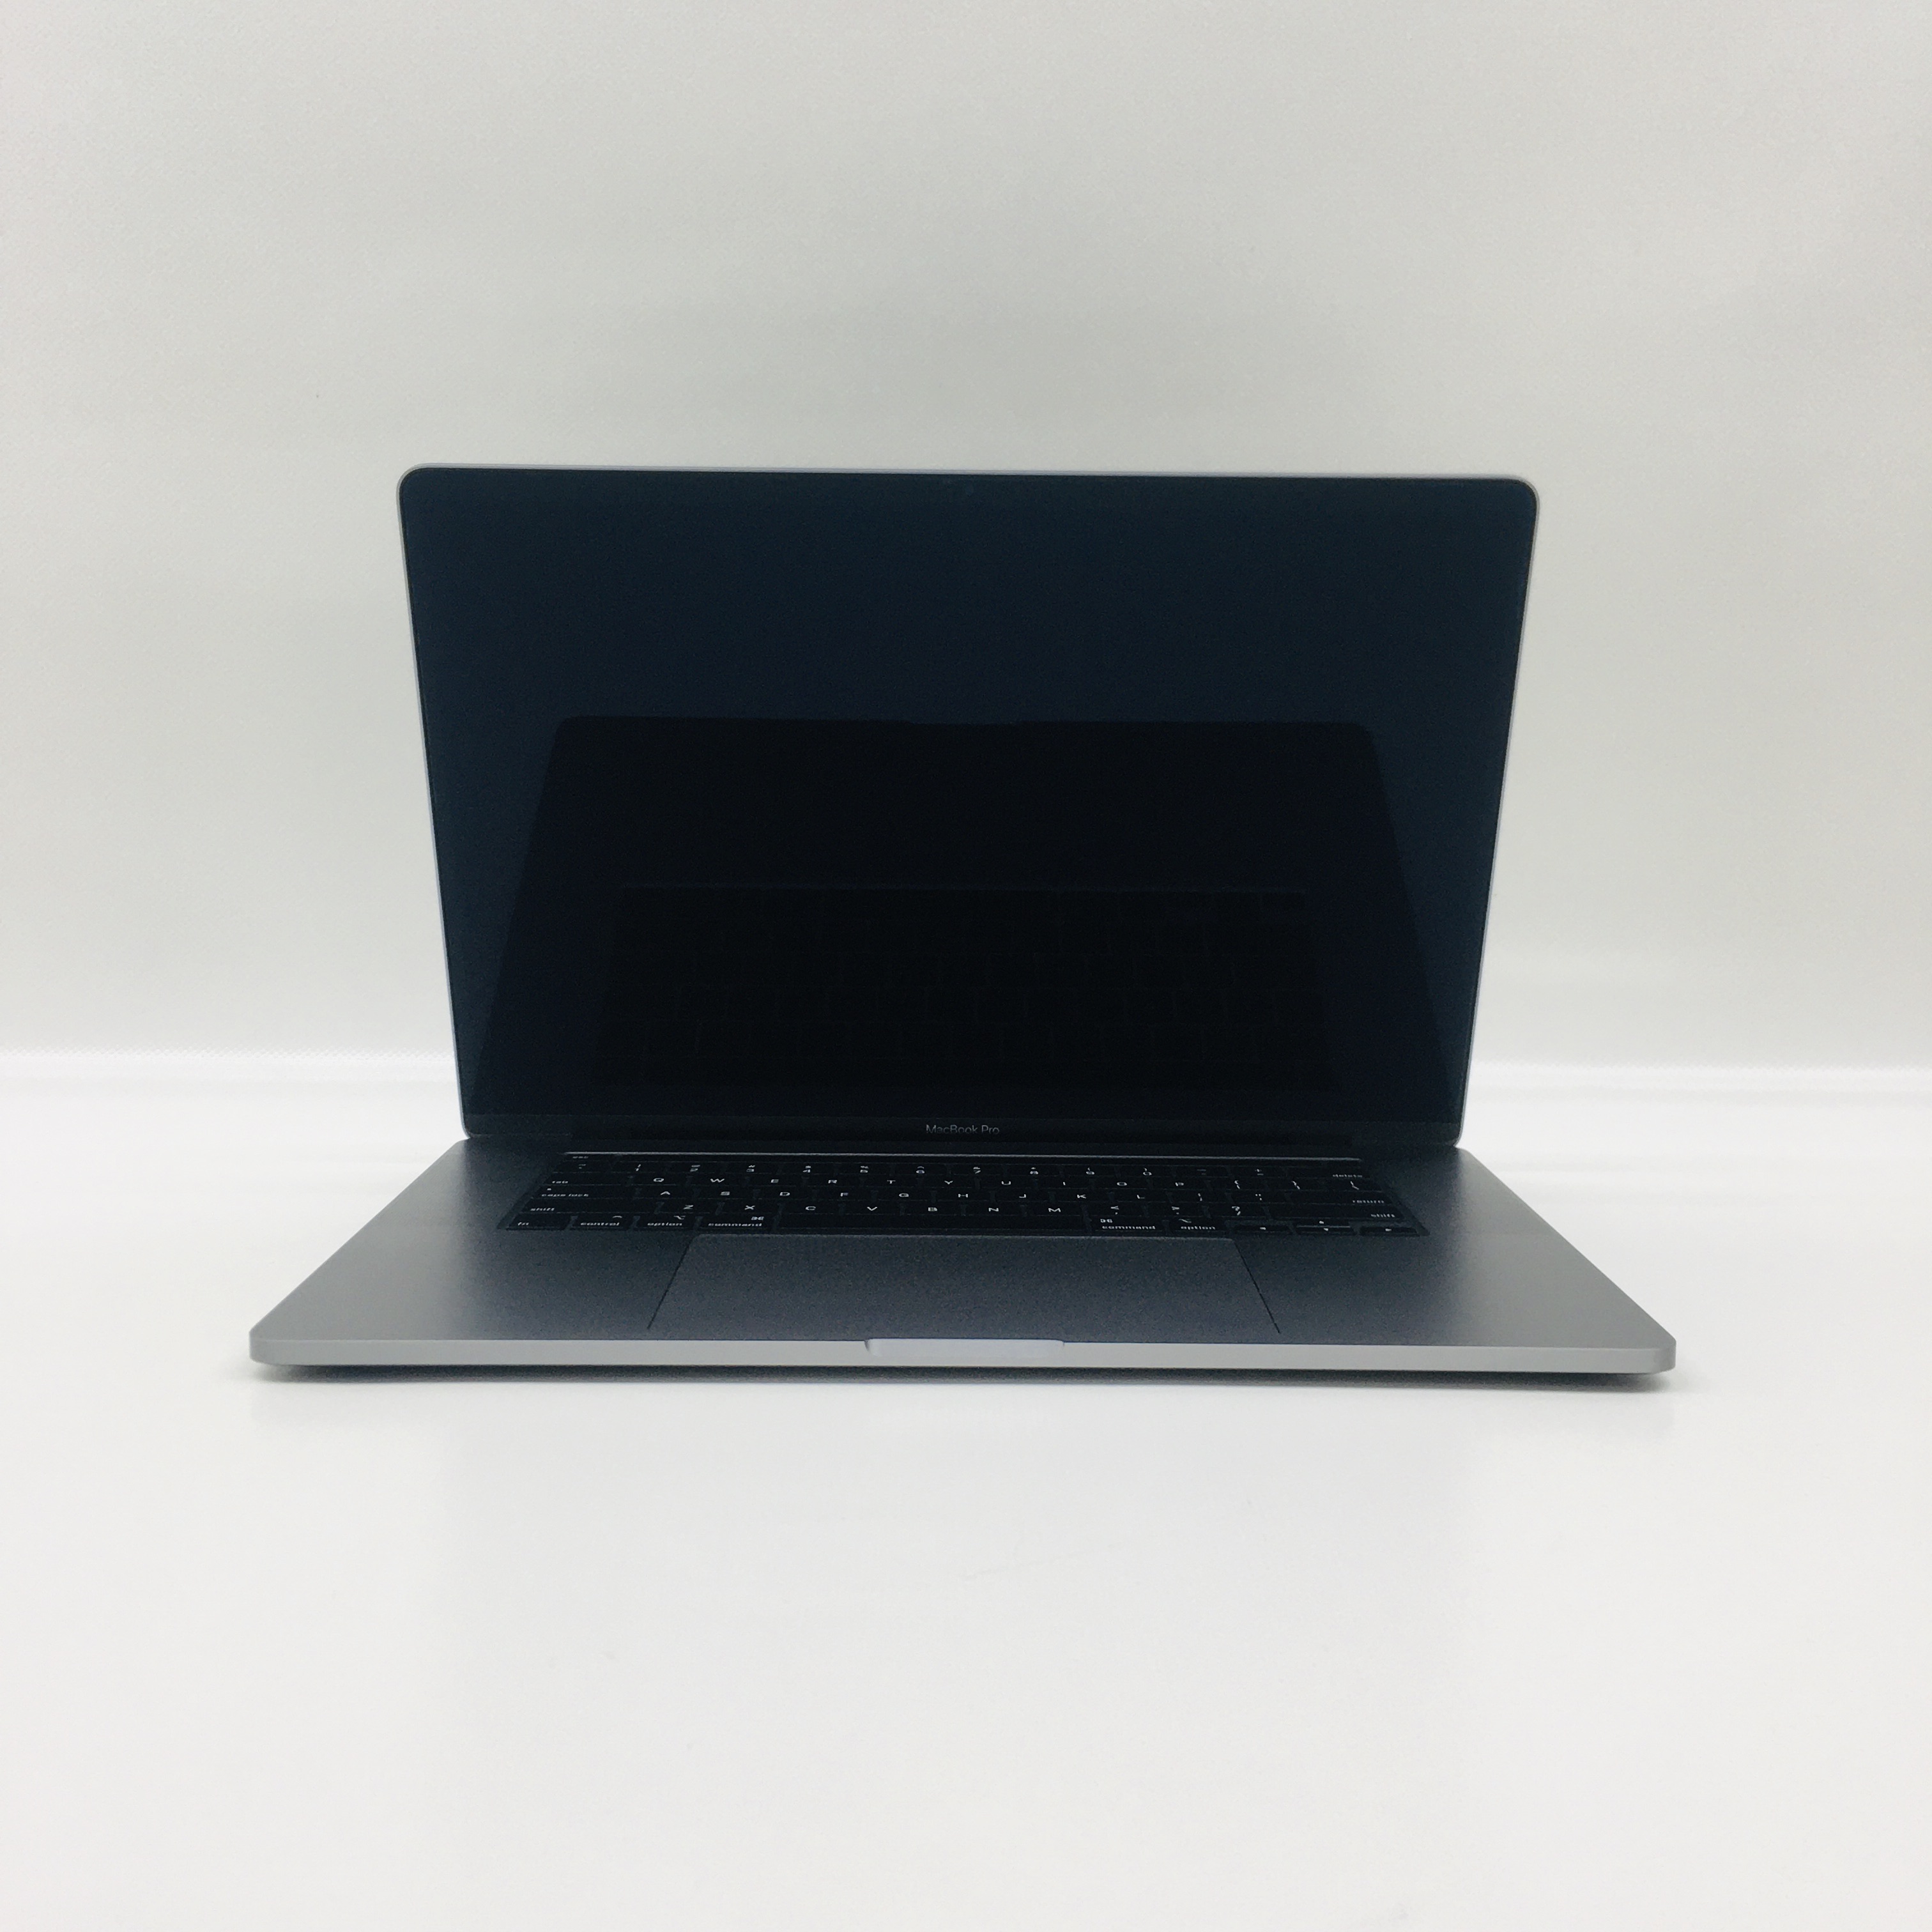 MacBook Pro 16" Touch Bar Late 2019 (Intel 6-Core i7 2.6 GHz 32 GB RAM 512 GB SSD), Space Gray, Intel 6-Core i7 2.6 GHz, 32 GB RAM, 512 GB SSD, image 1